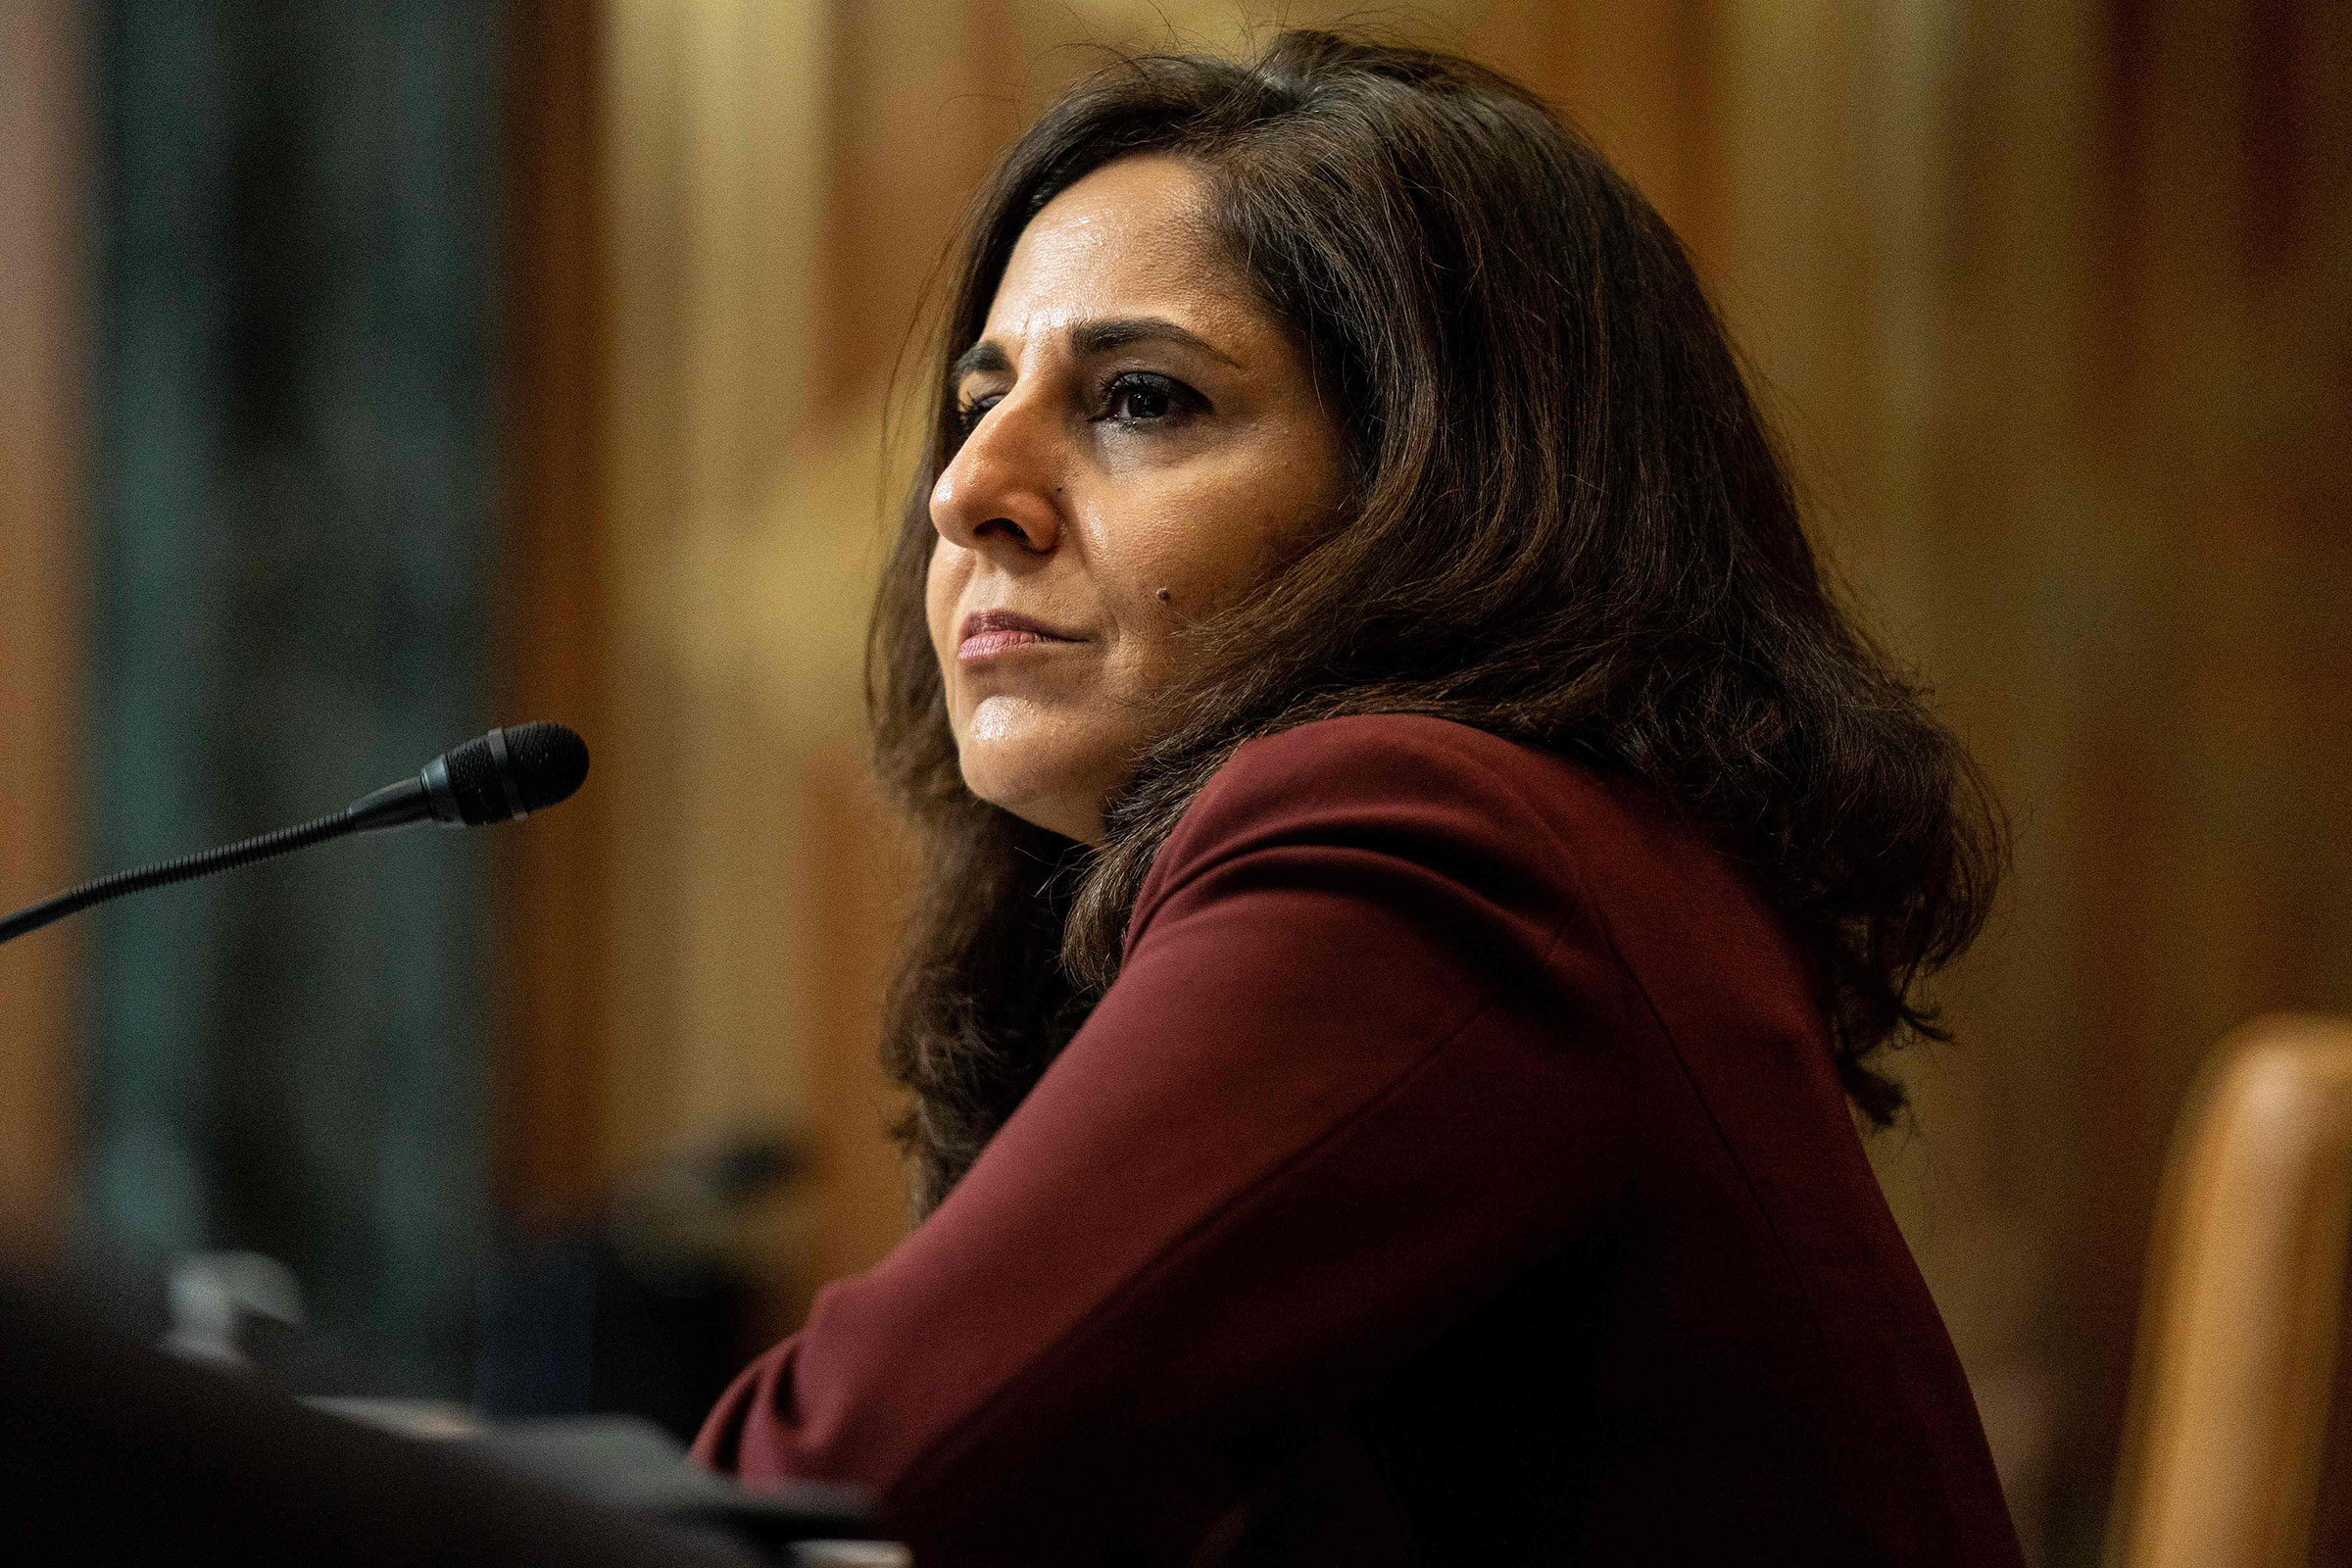 Neera Tanden, nominee for Director of the Office of Management and Budget, testifies during a Senate Committee on the Budget hearing on Capitol Hill in Washington, on Feb. 10, 2021.